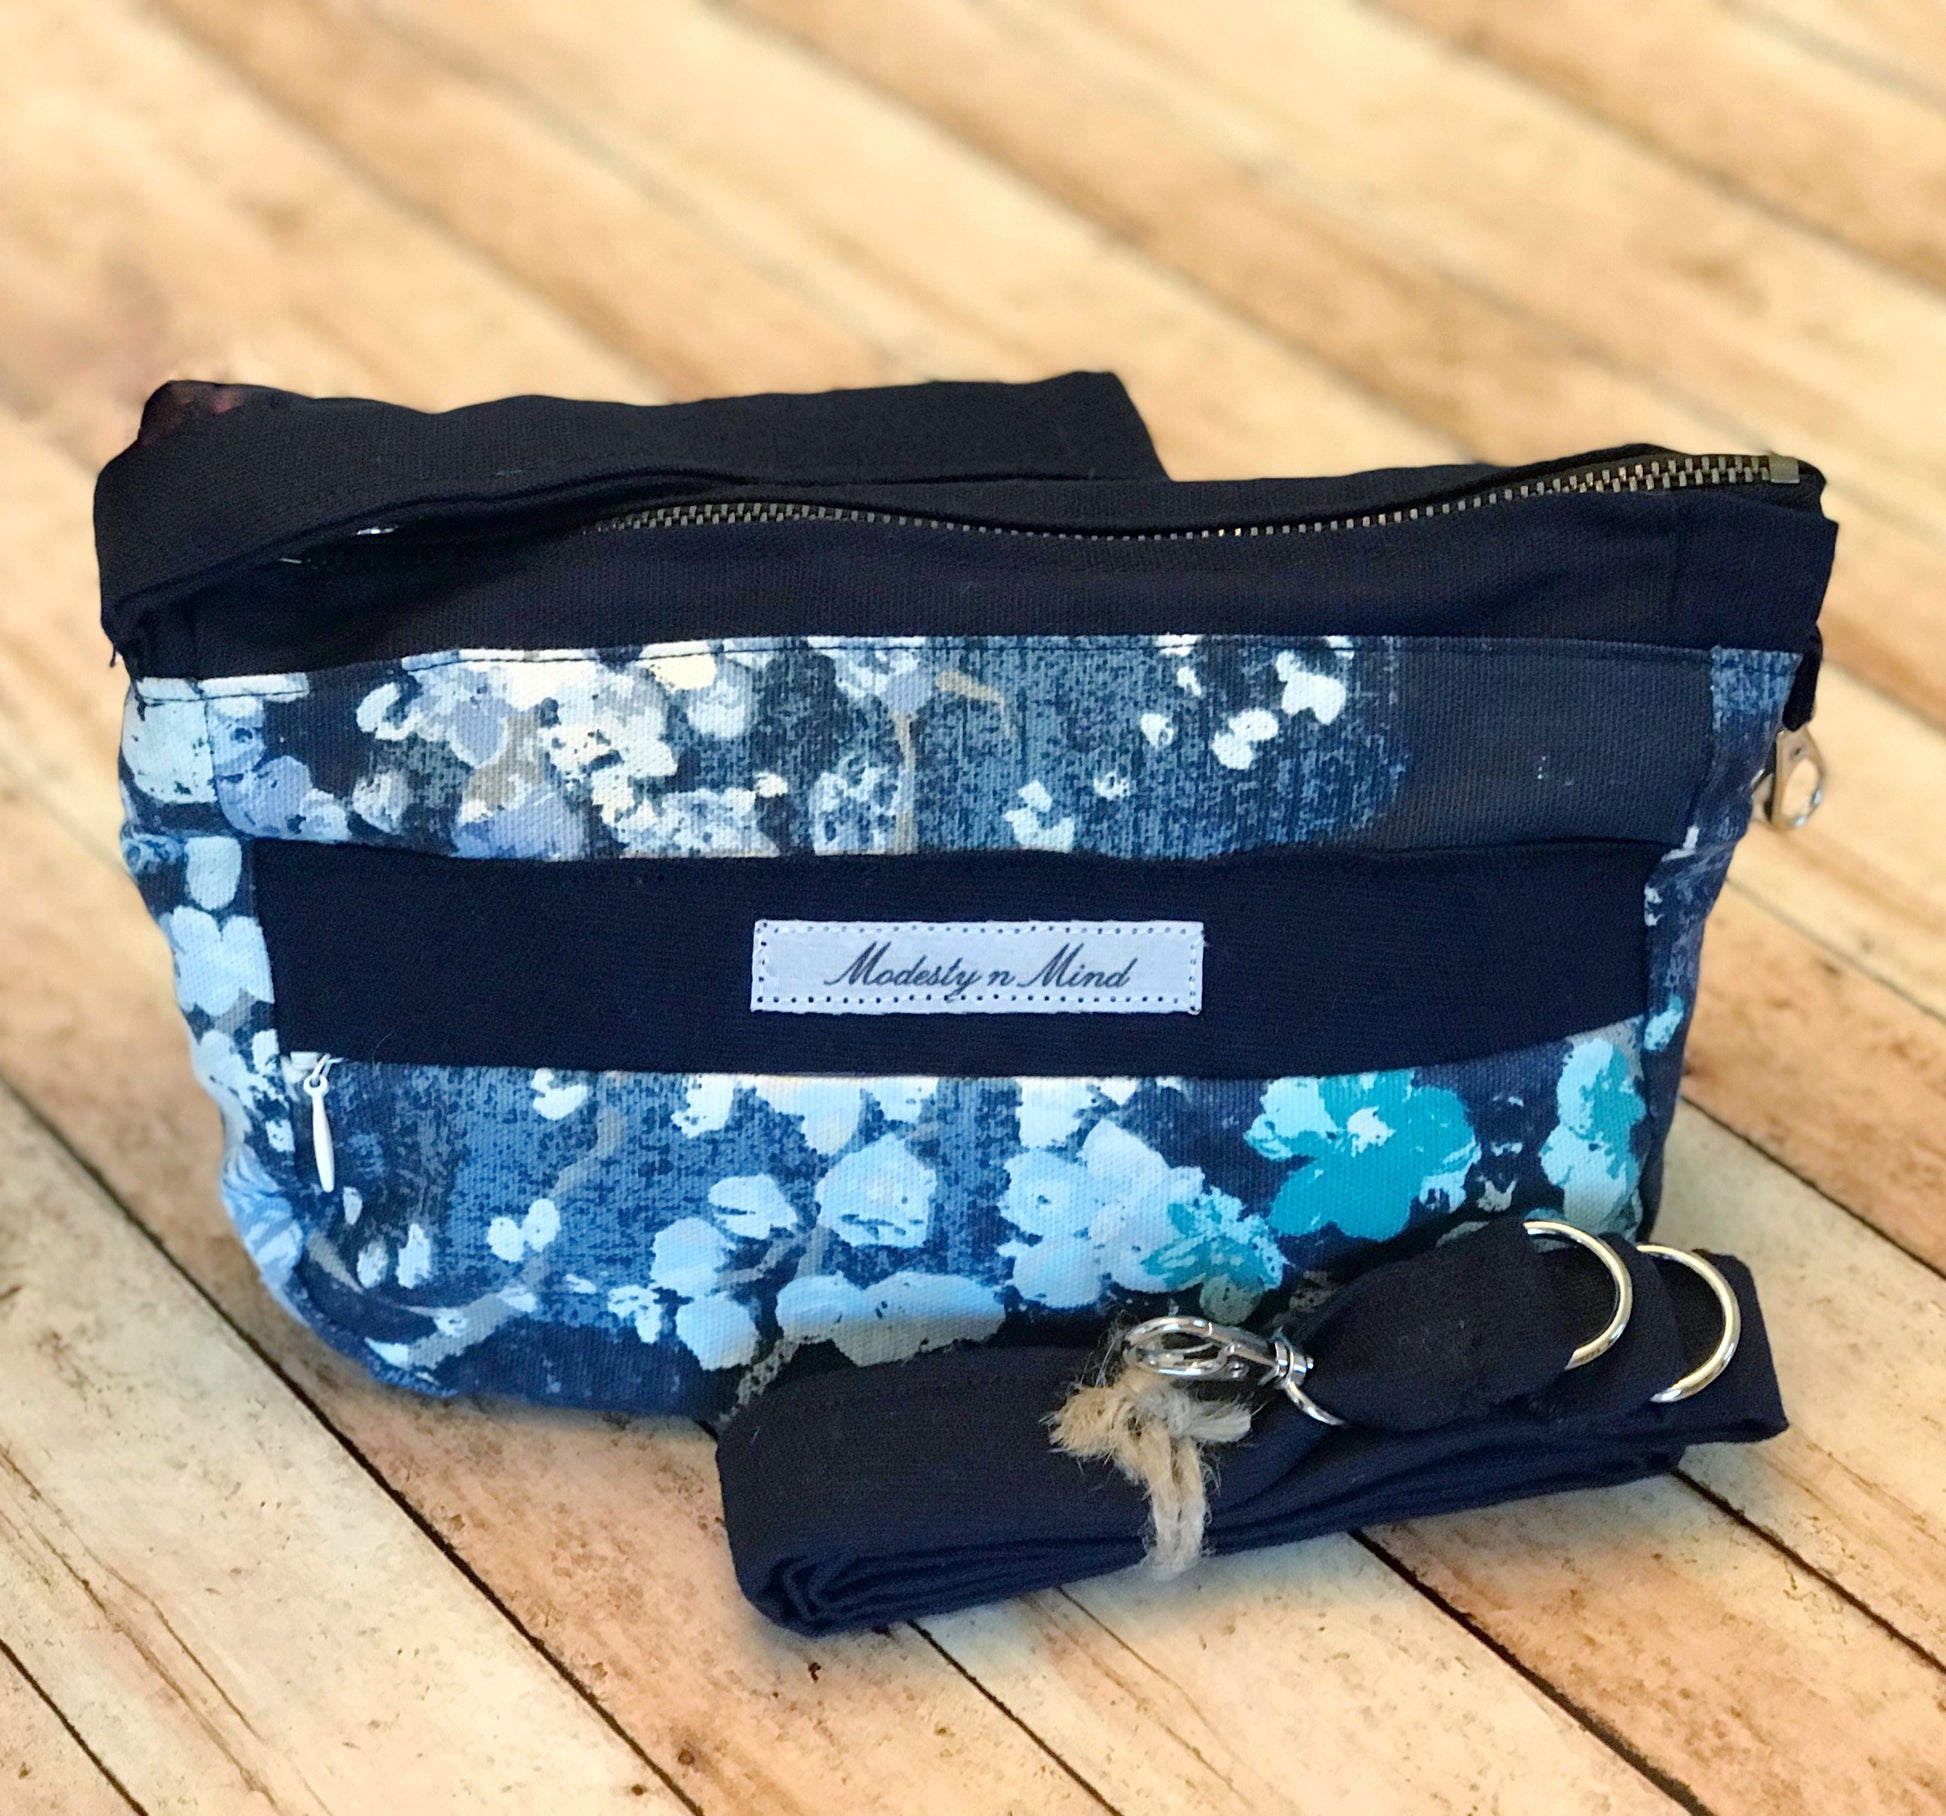 Blue teal floral wristlet sitting on backdrop with a navy blue strap leaning against it.